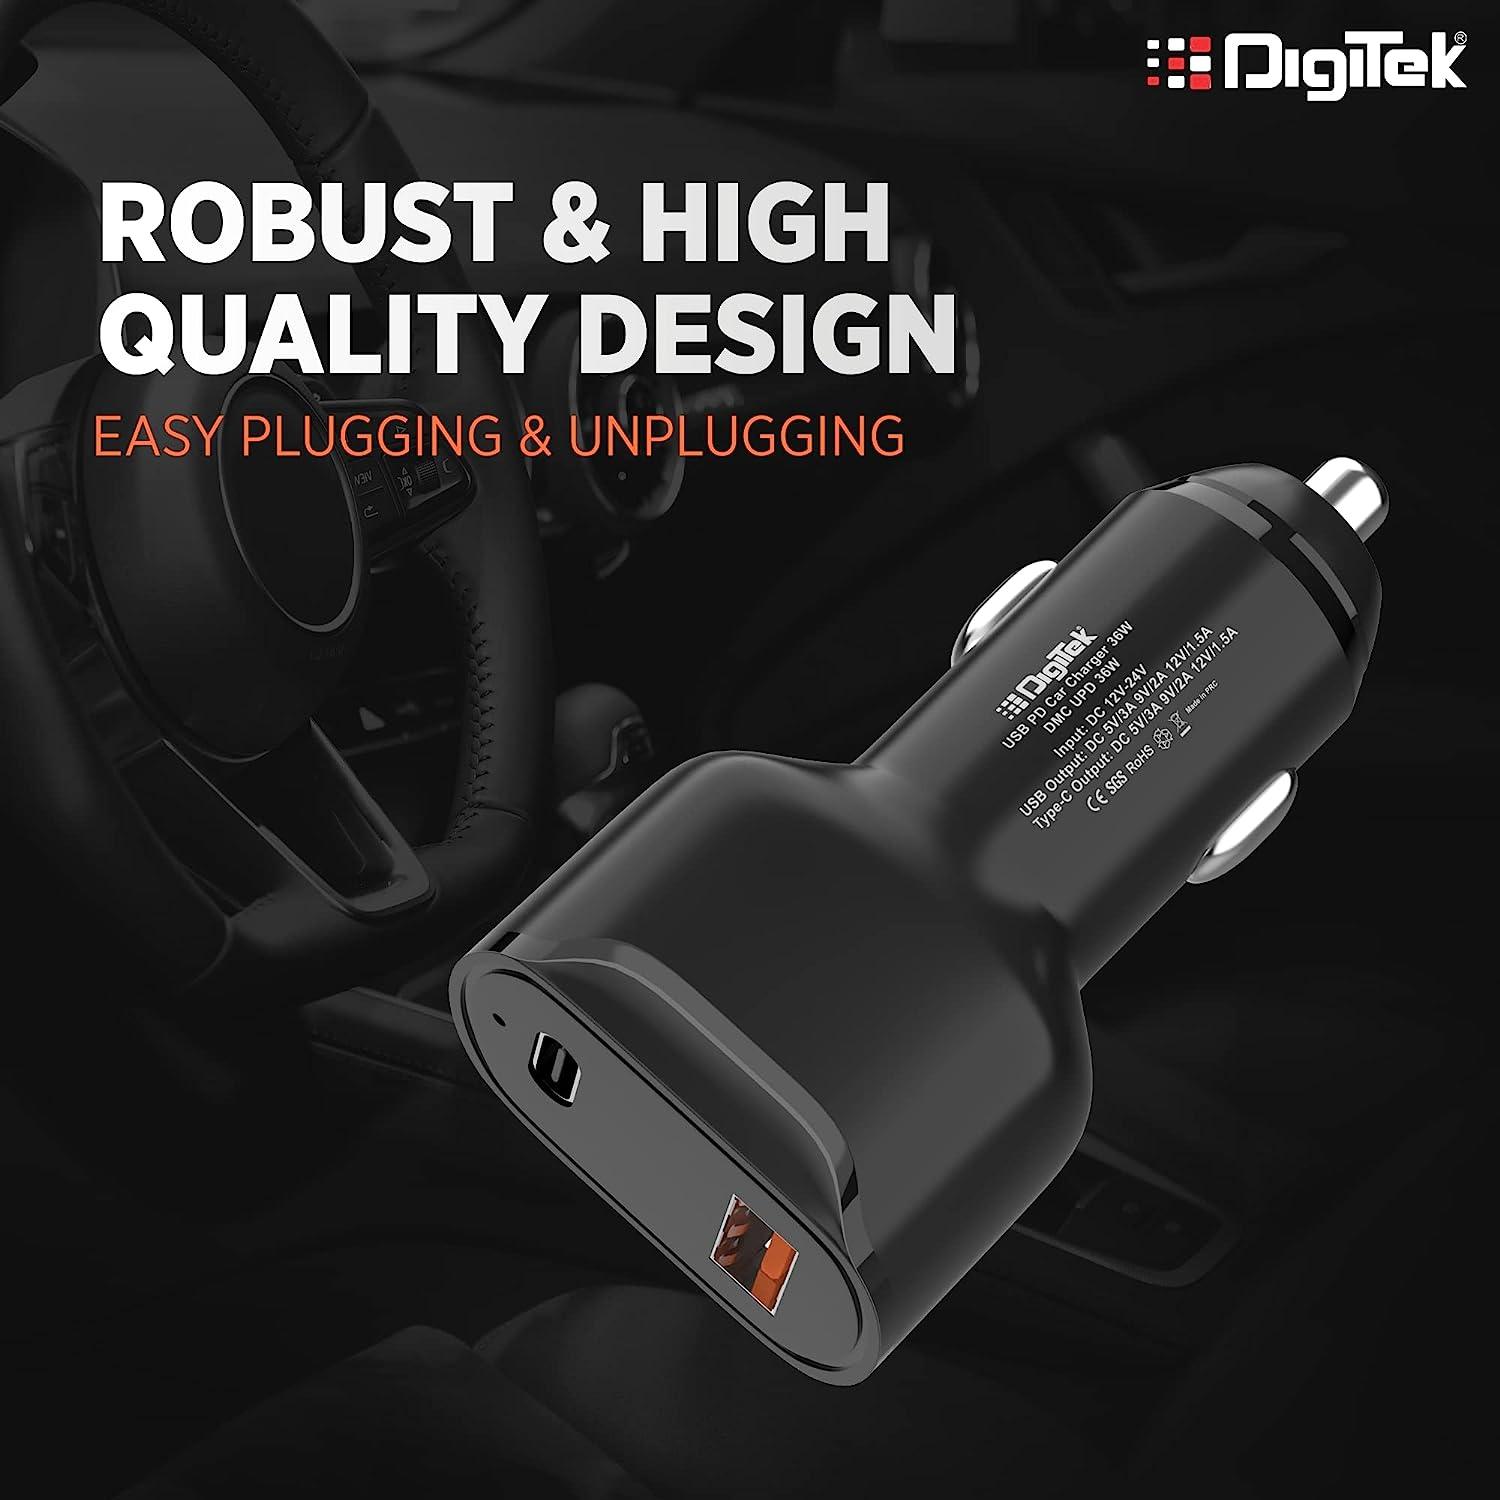 Dc 5v charger • Compare (39 products) see prices »